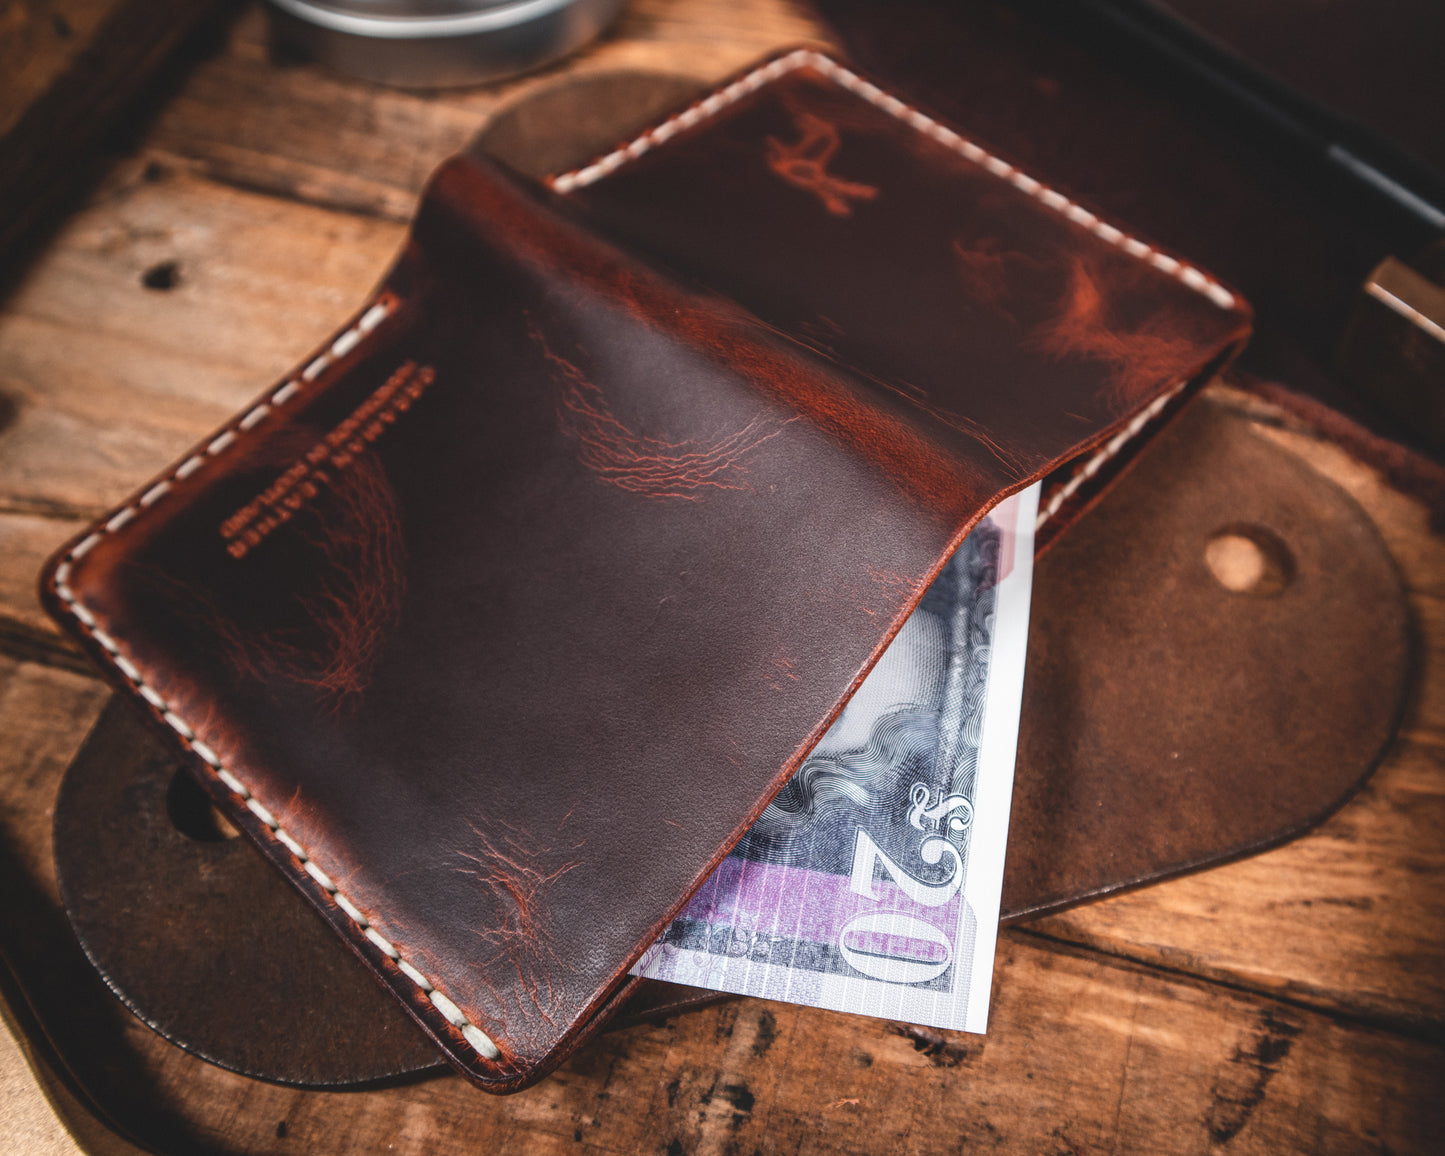 The Chieftain - Handmade Leather EDC Wallet